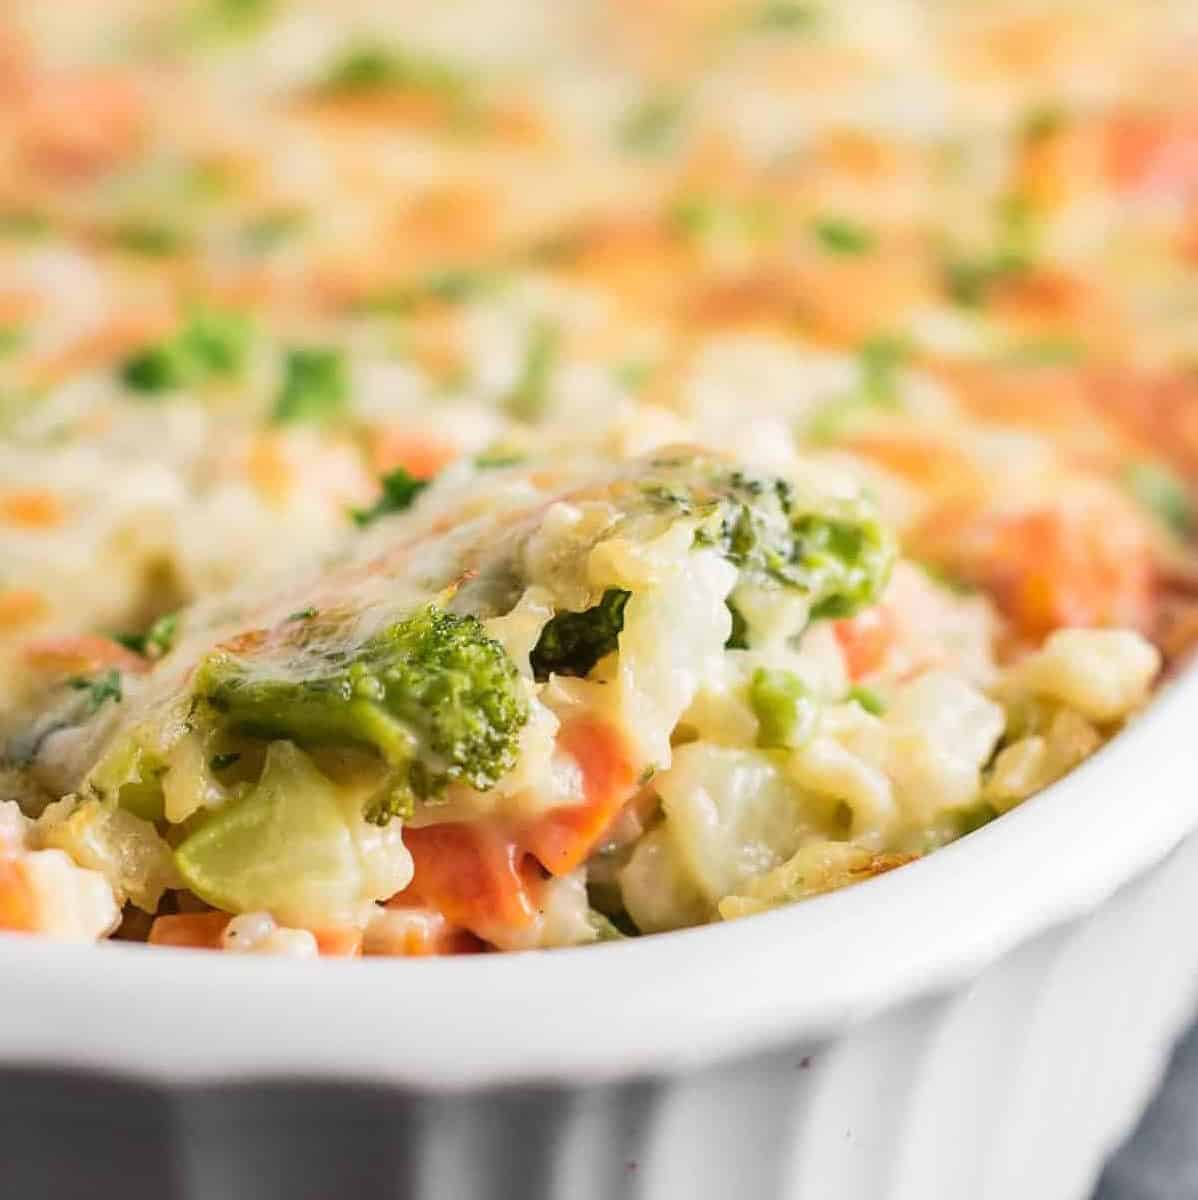  Who needs meat when you have this savory casserole? 🌱